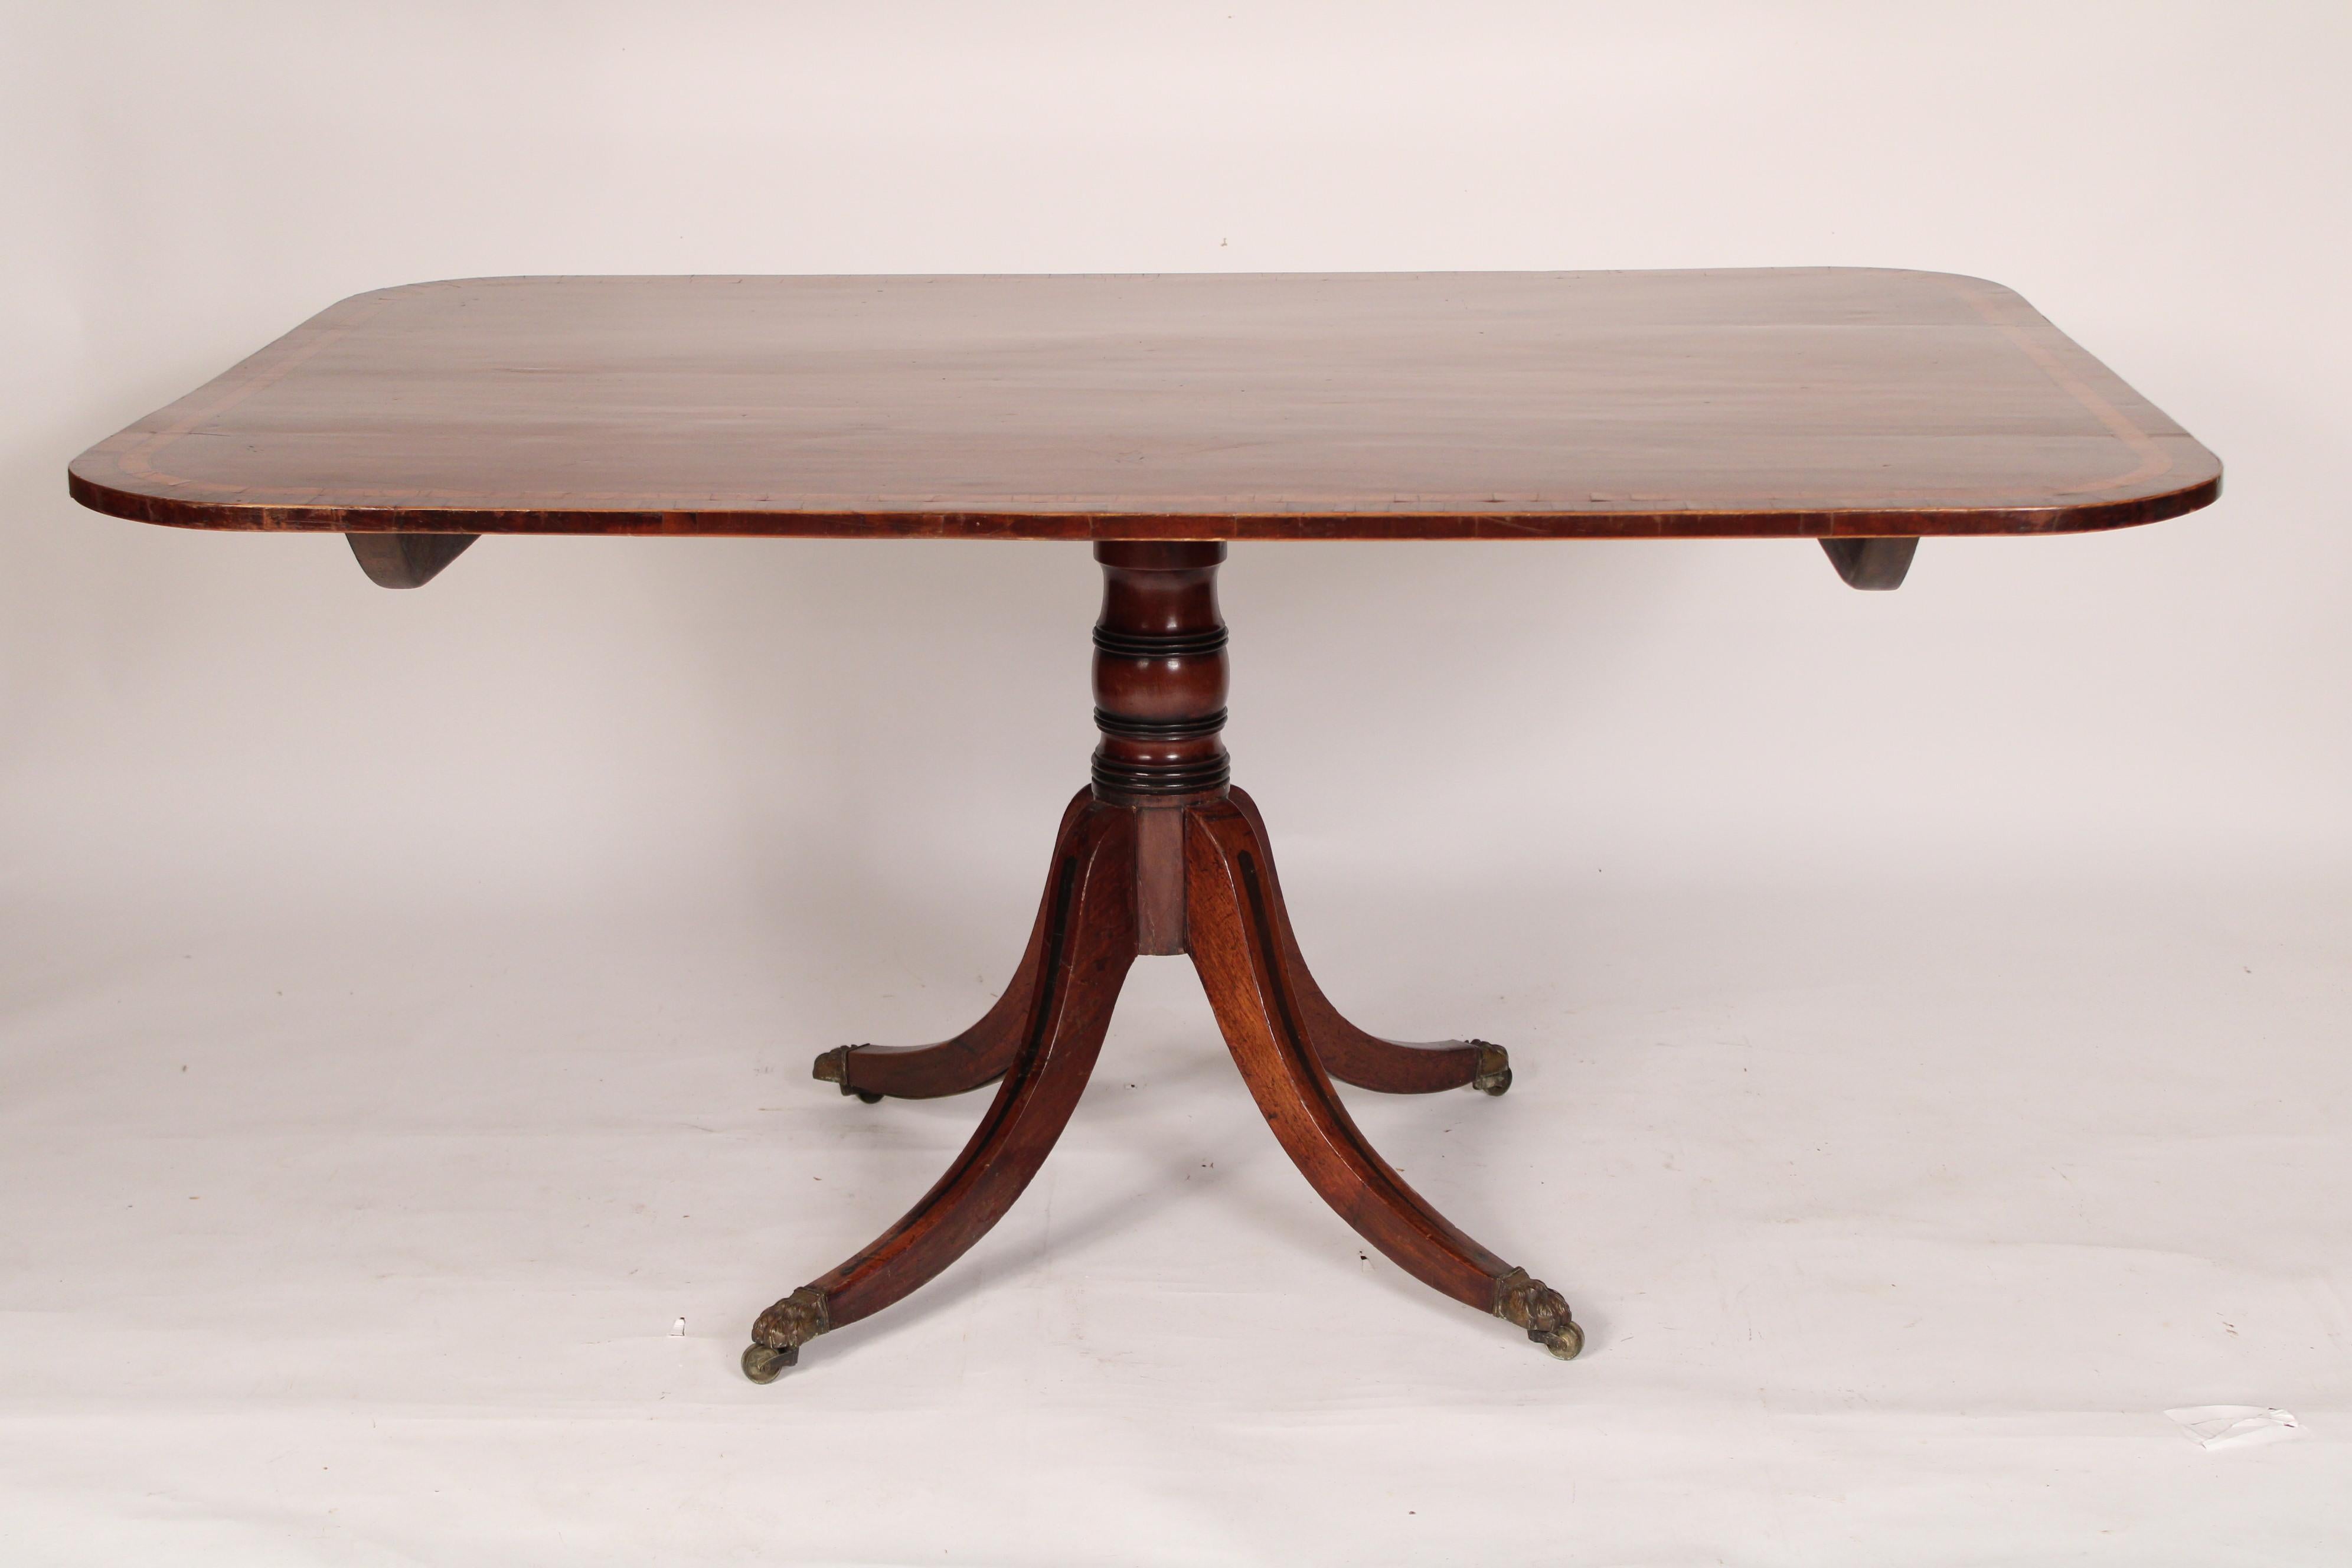 George III mahogany breakfast table, circa 1800. Mahogany top with rosewood and satinwood cross banding, a turned mahogany pedestal with 4 down swept mahogany legs with ebonized inlay, the legs ending in brass paw feet. Knee clearance 28.25